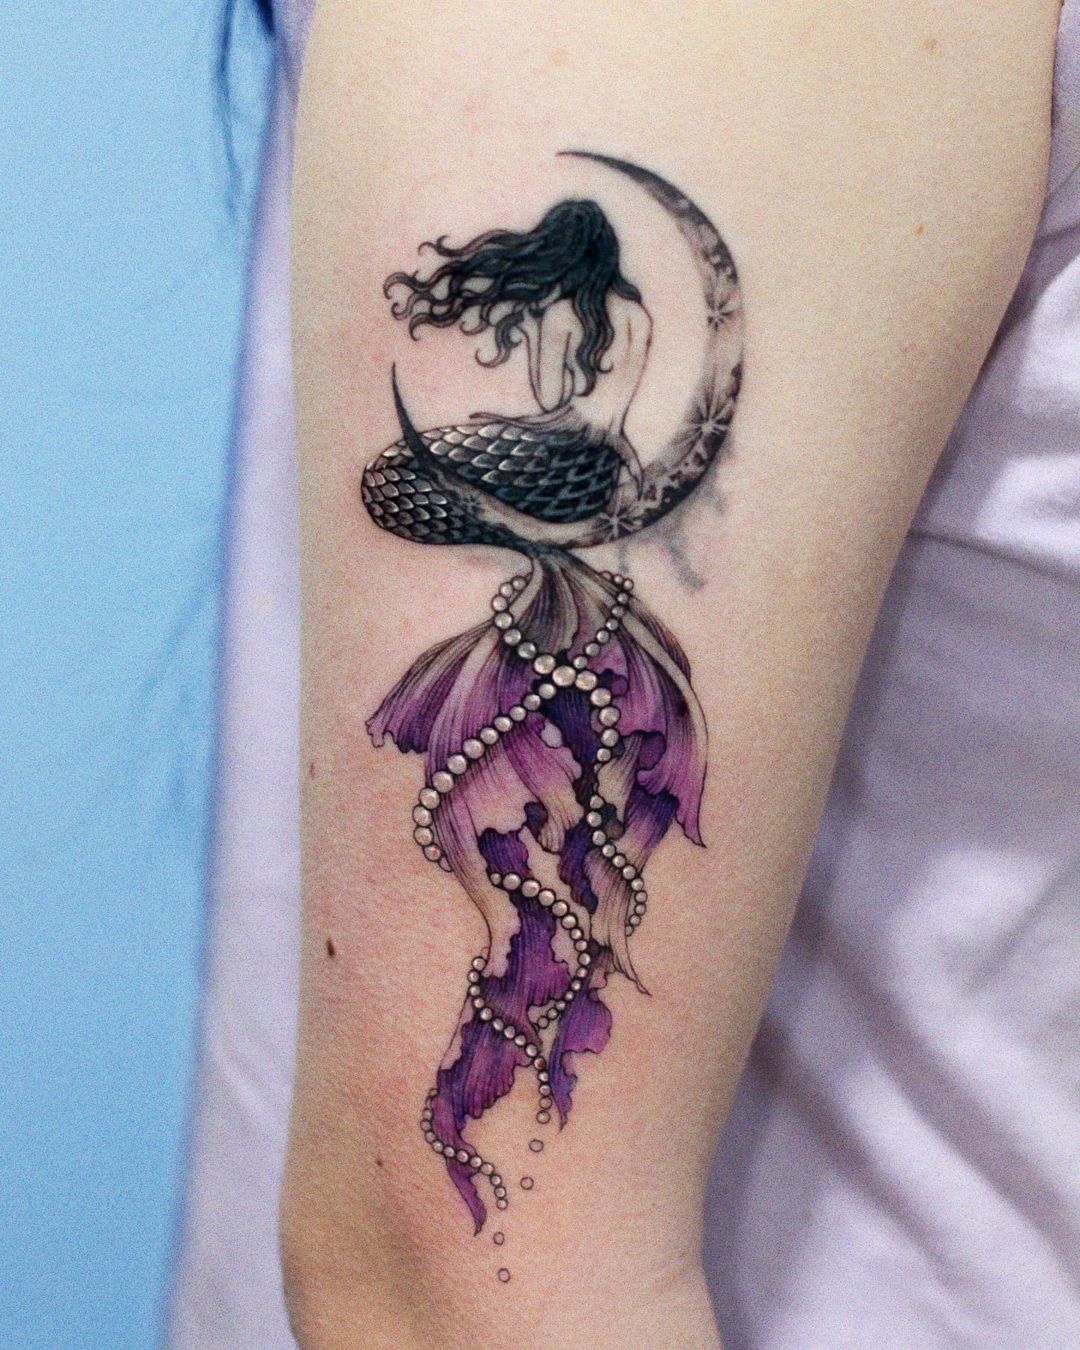 Mermaid thigh piece - tattooed by... - The Tattoo Gallery | Facebook